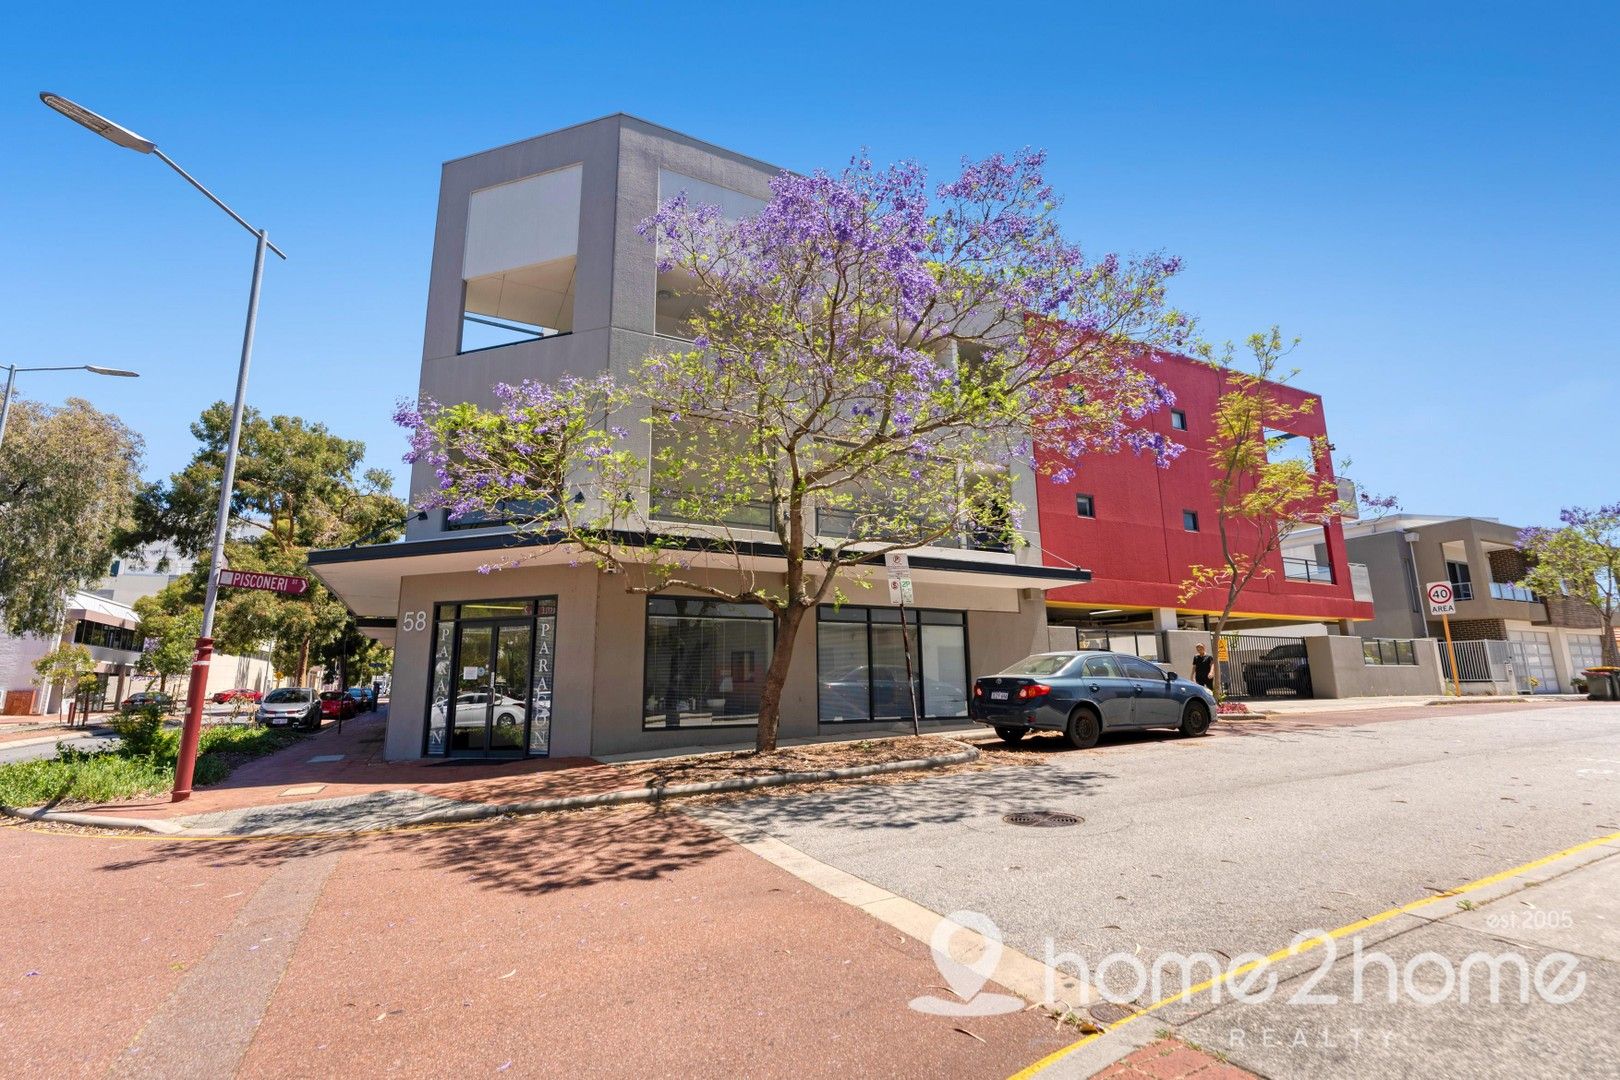 2 bedrooms House in 5/58 Newcastle Street PERTH WA, 6000